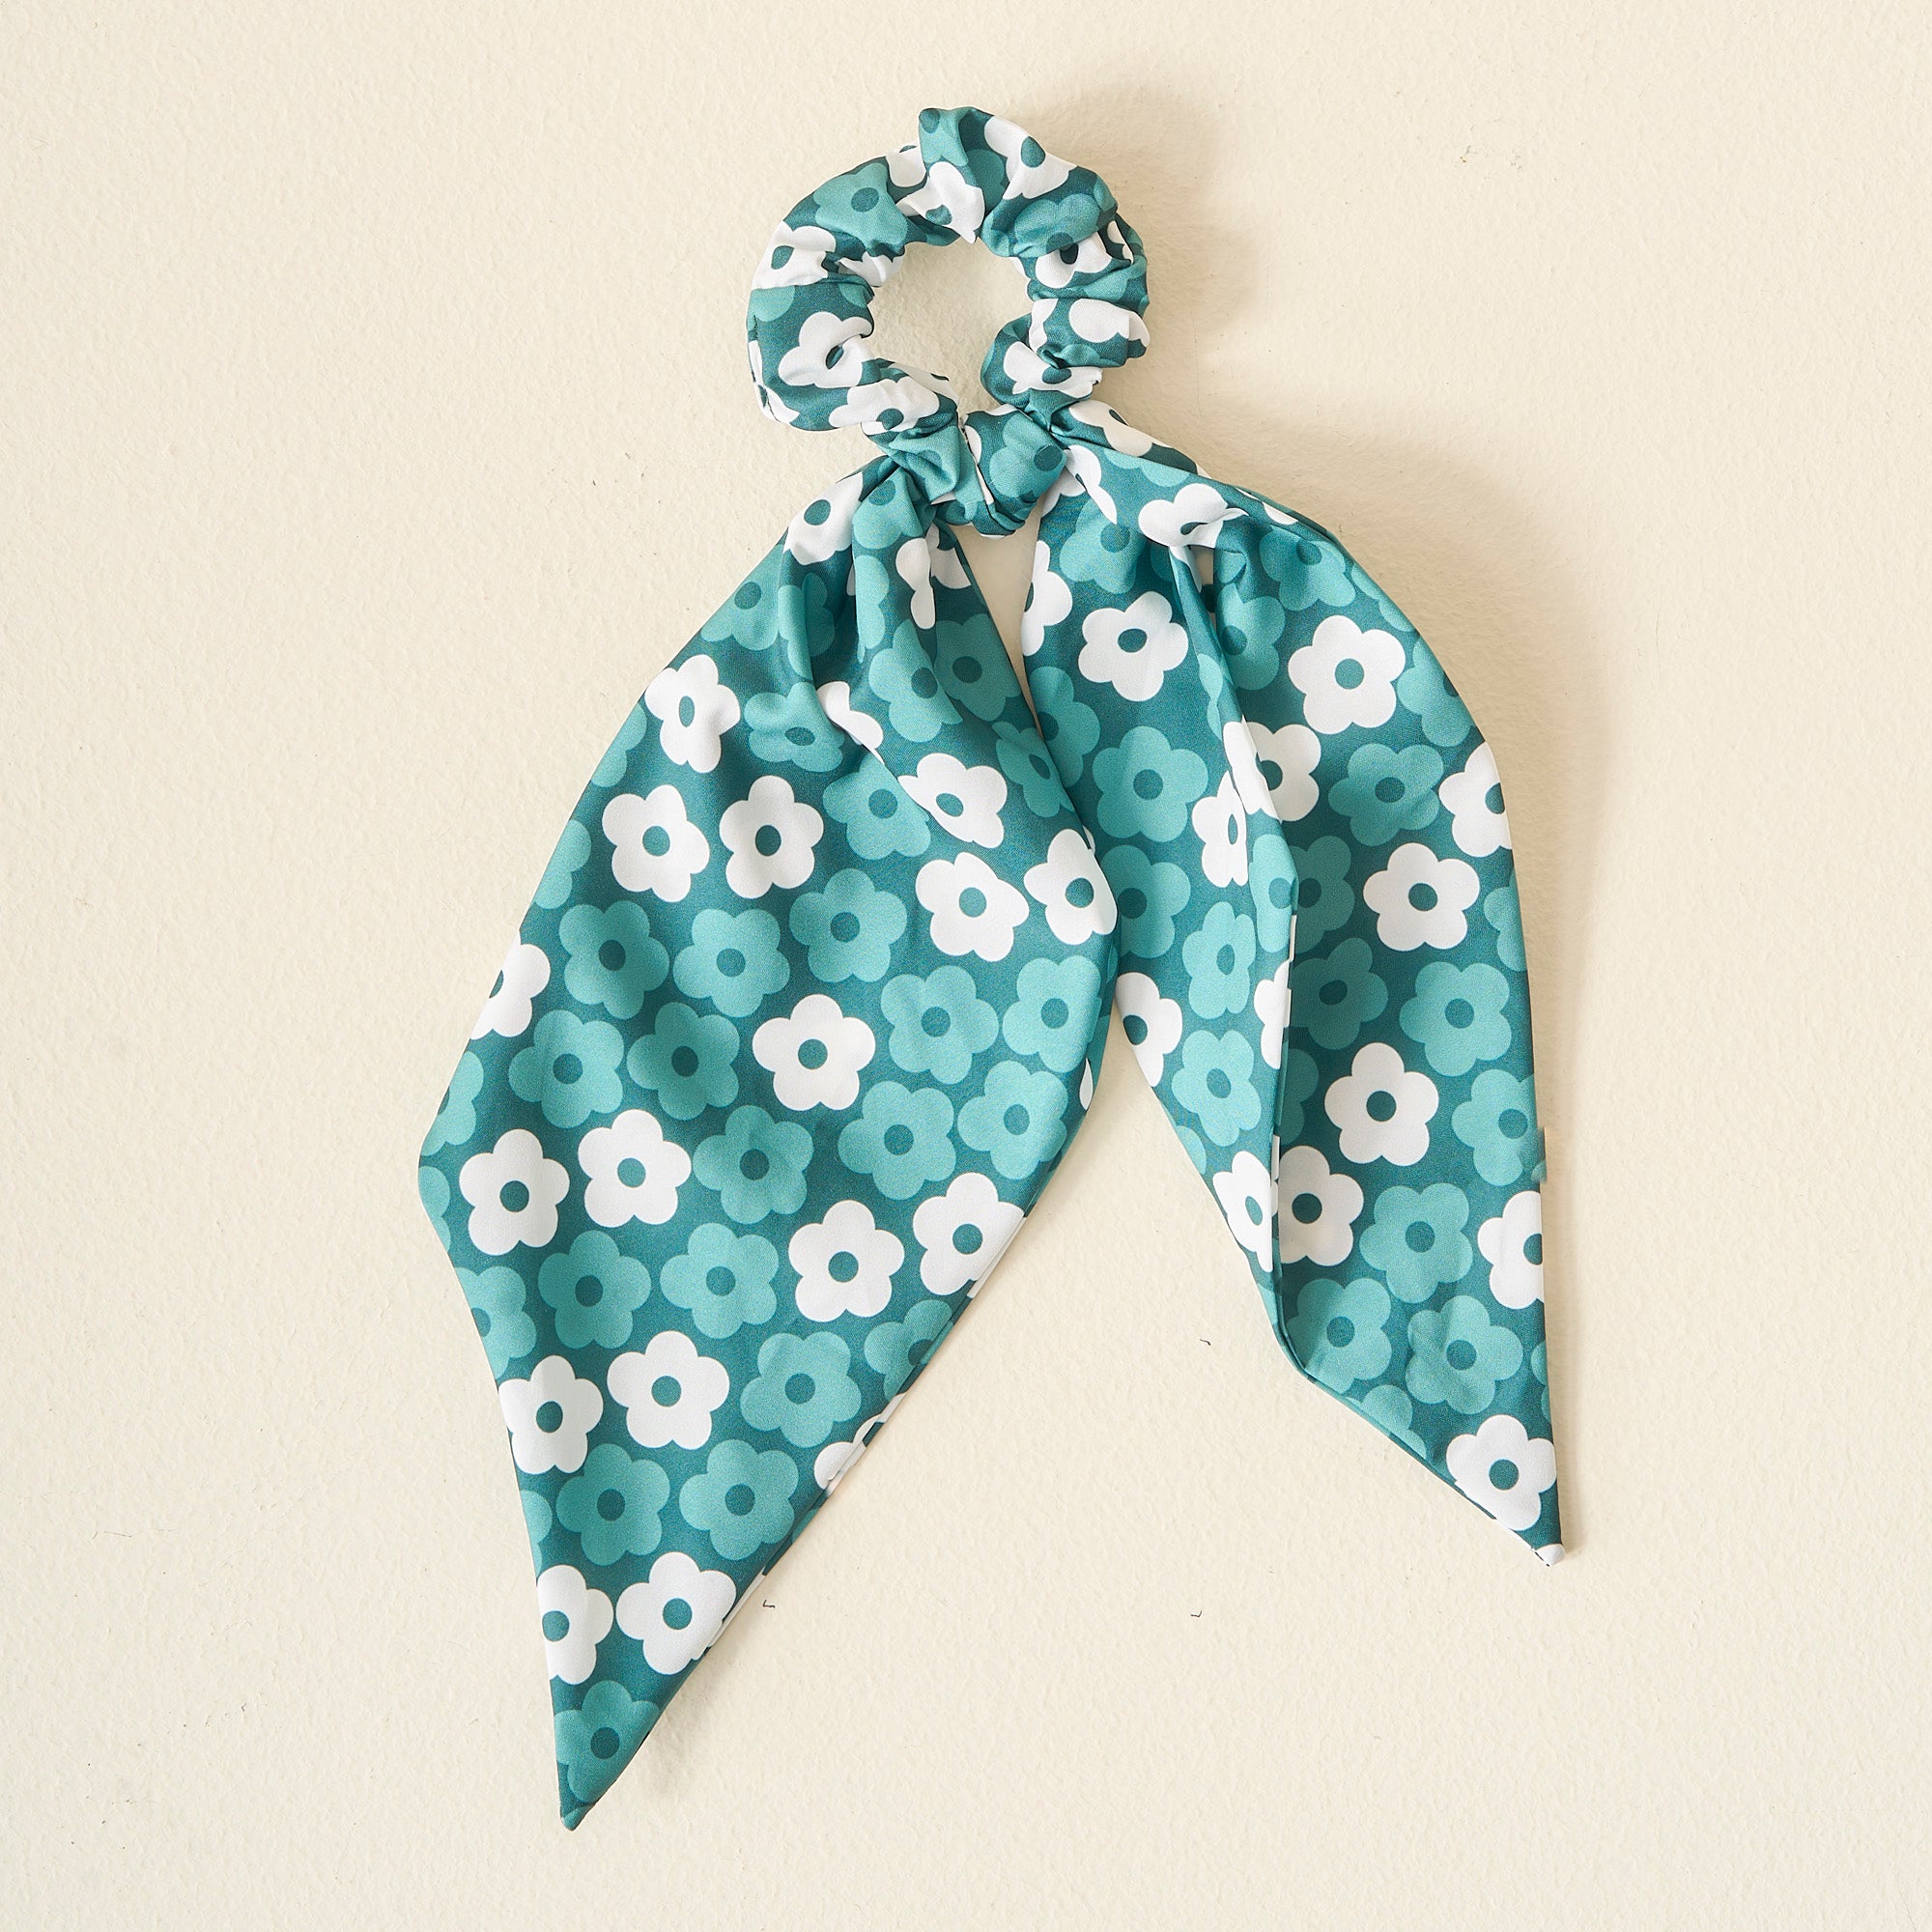 Game Day Hair Scarf - 8 Colors Available!